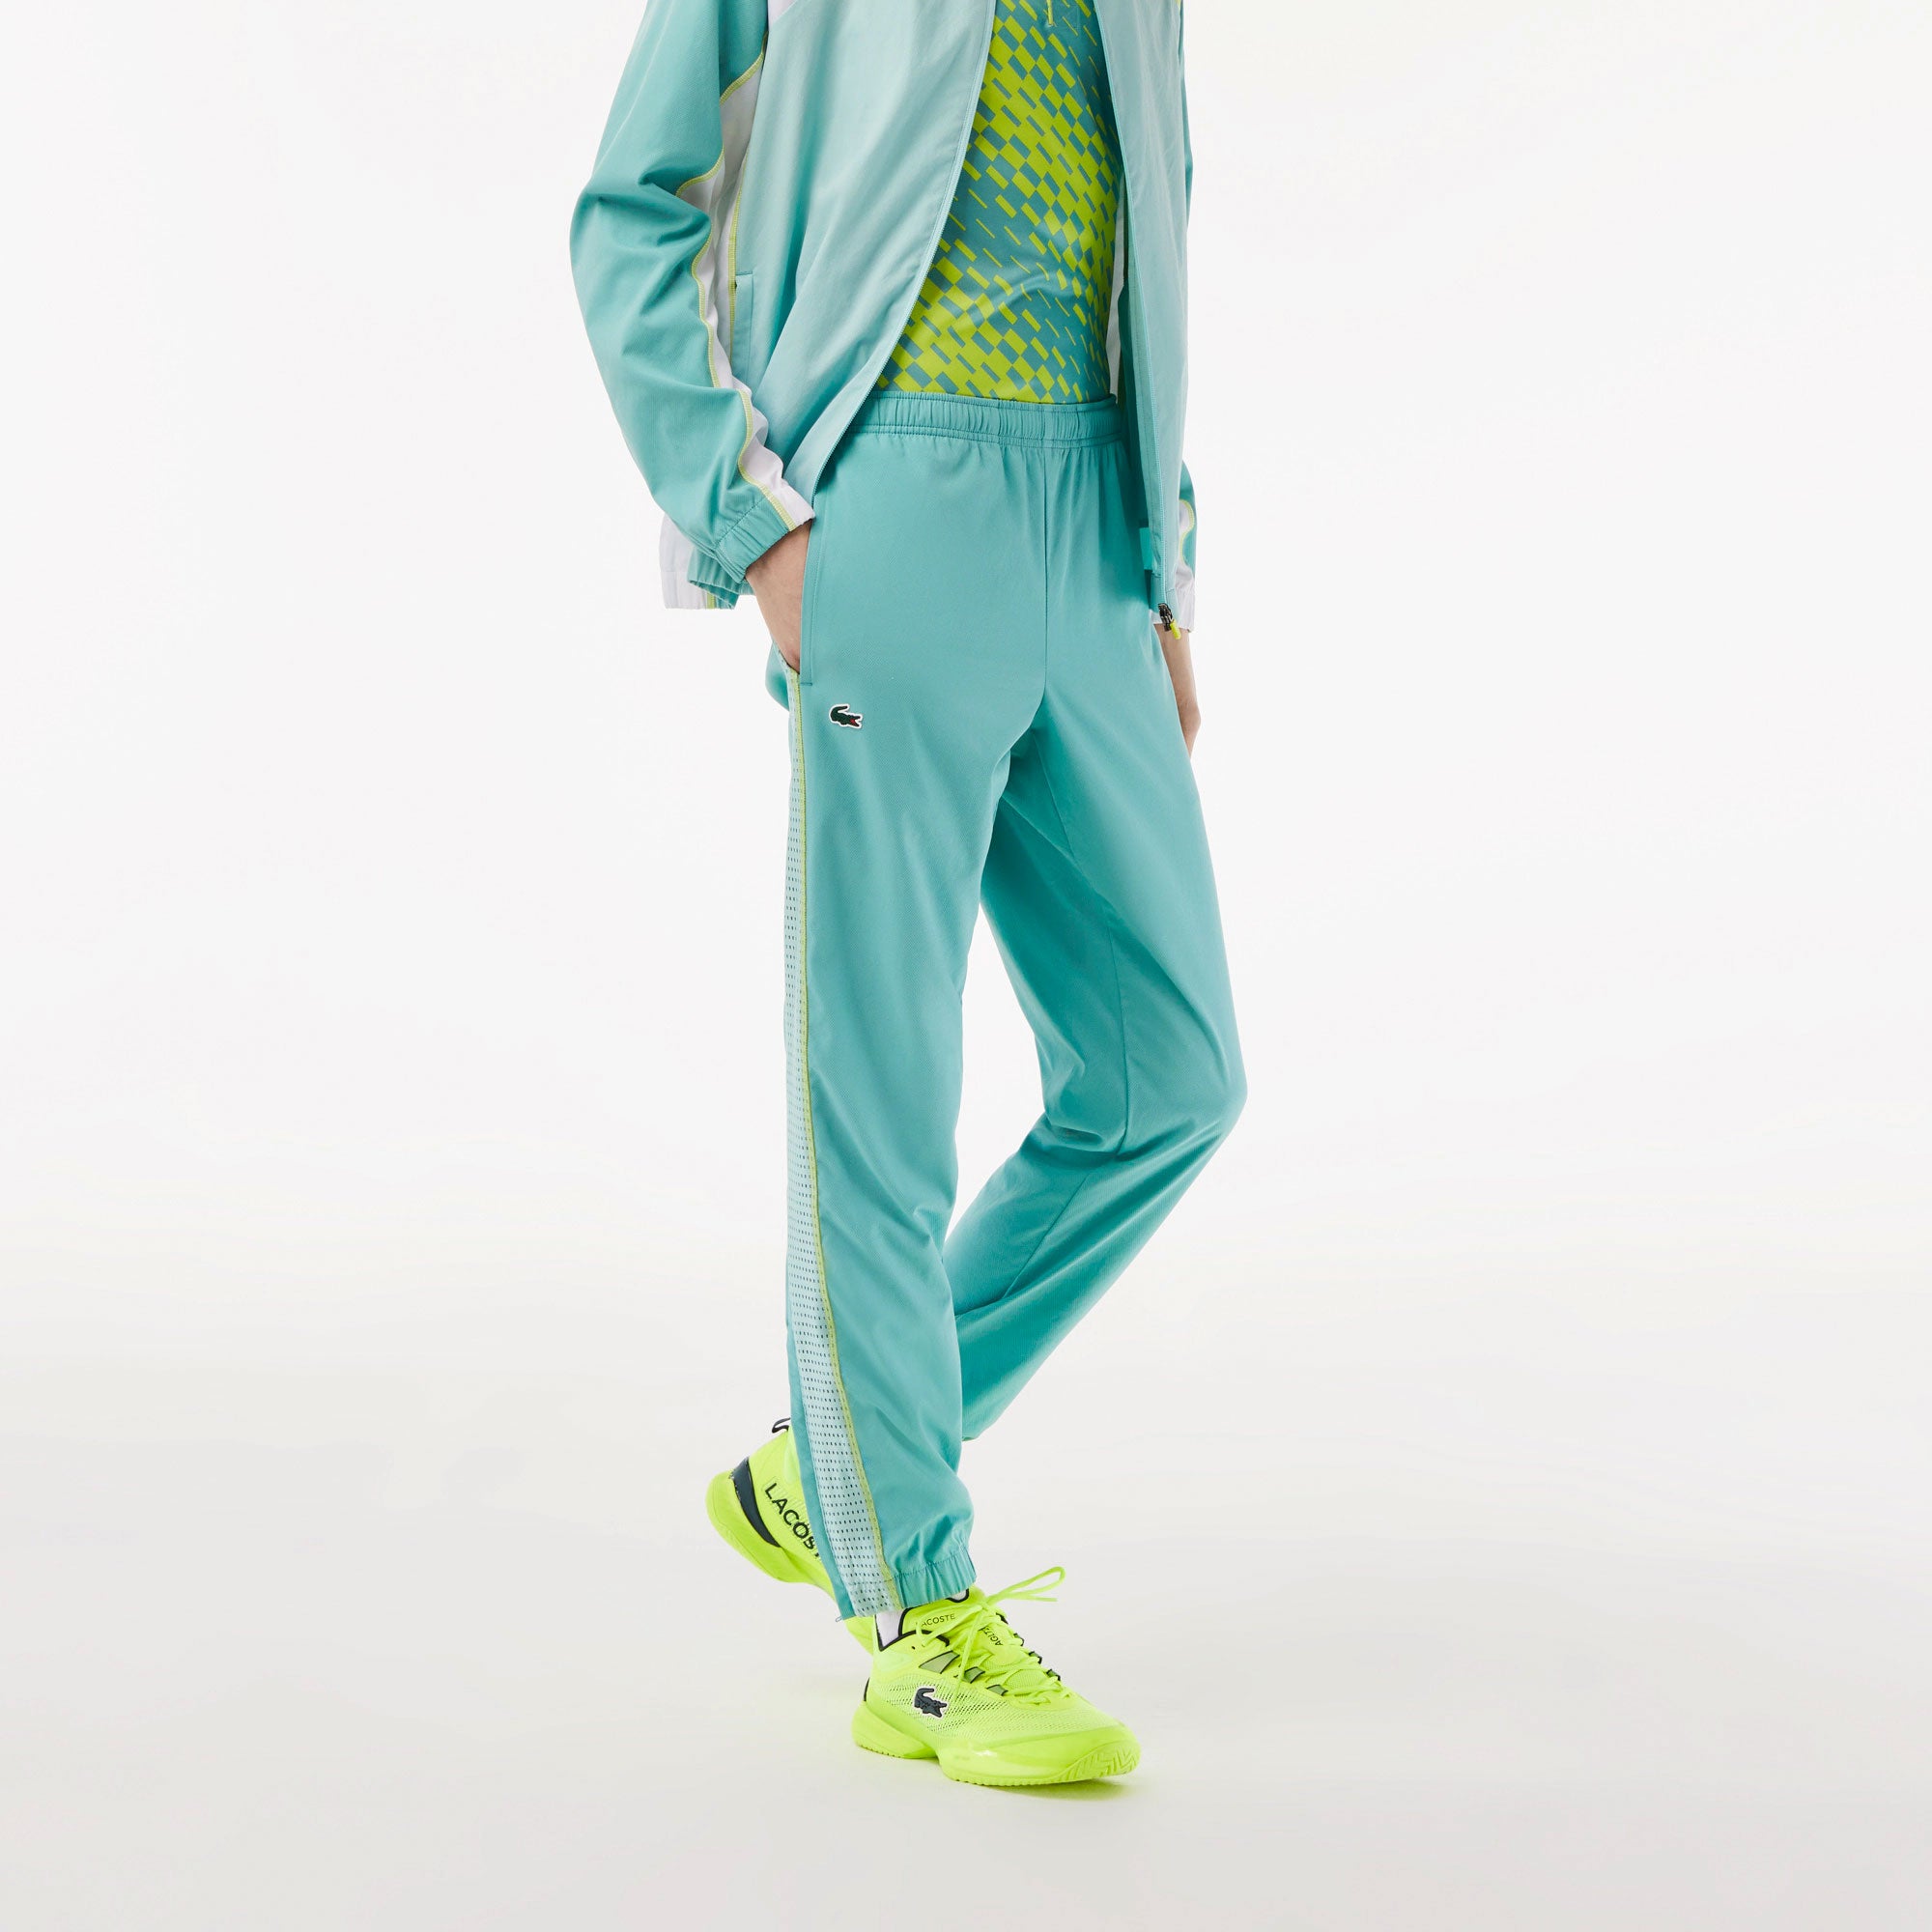 XFJ  XH5585  Lacoste Tracksuit Trousers  Серый шарф lacoste   HotelomegaShops STORE